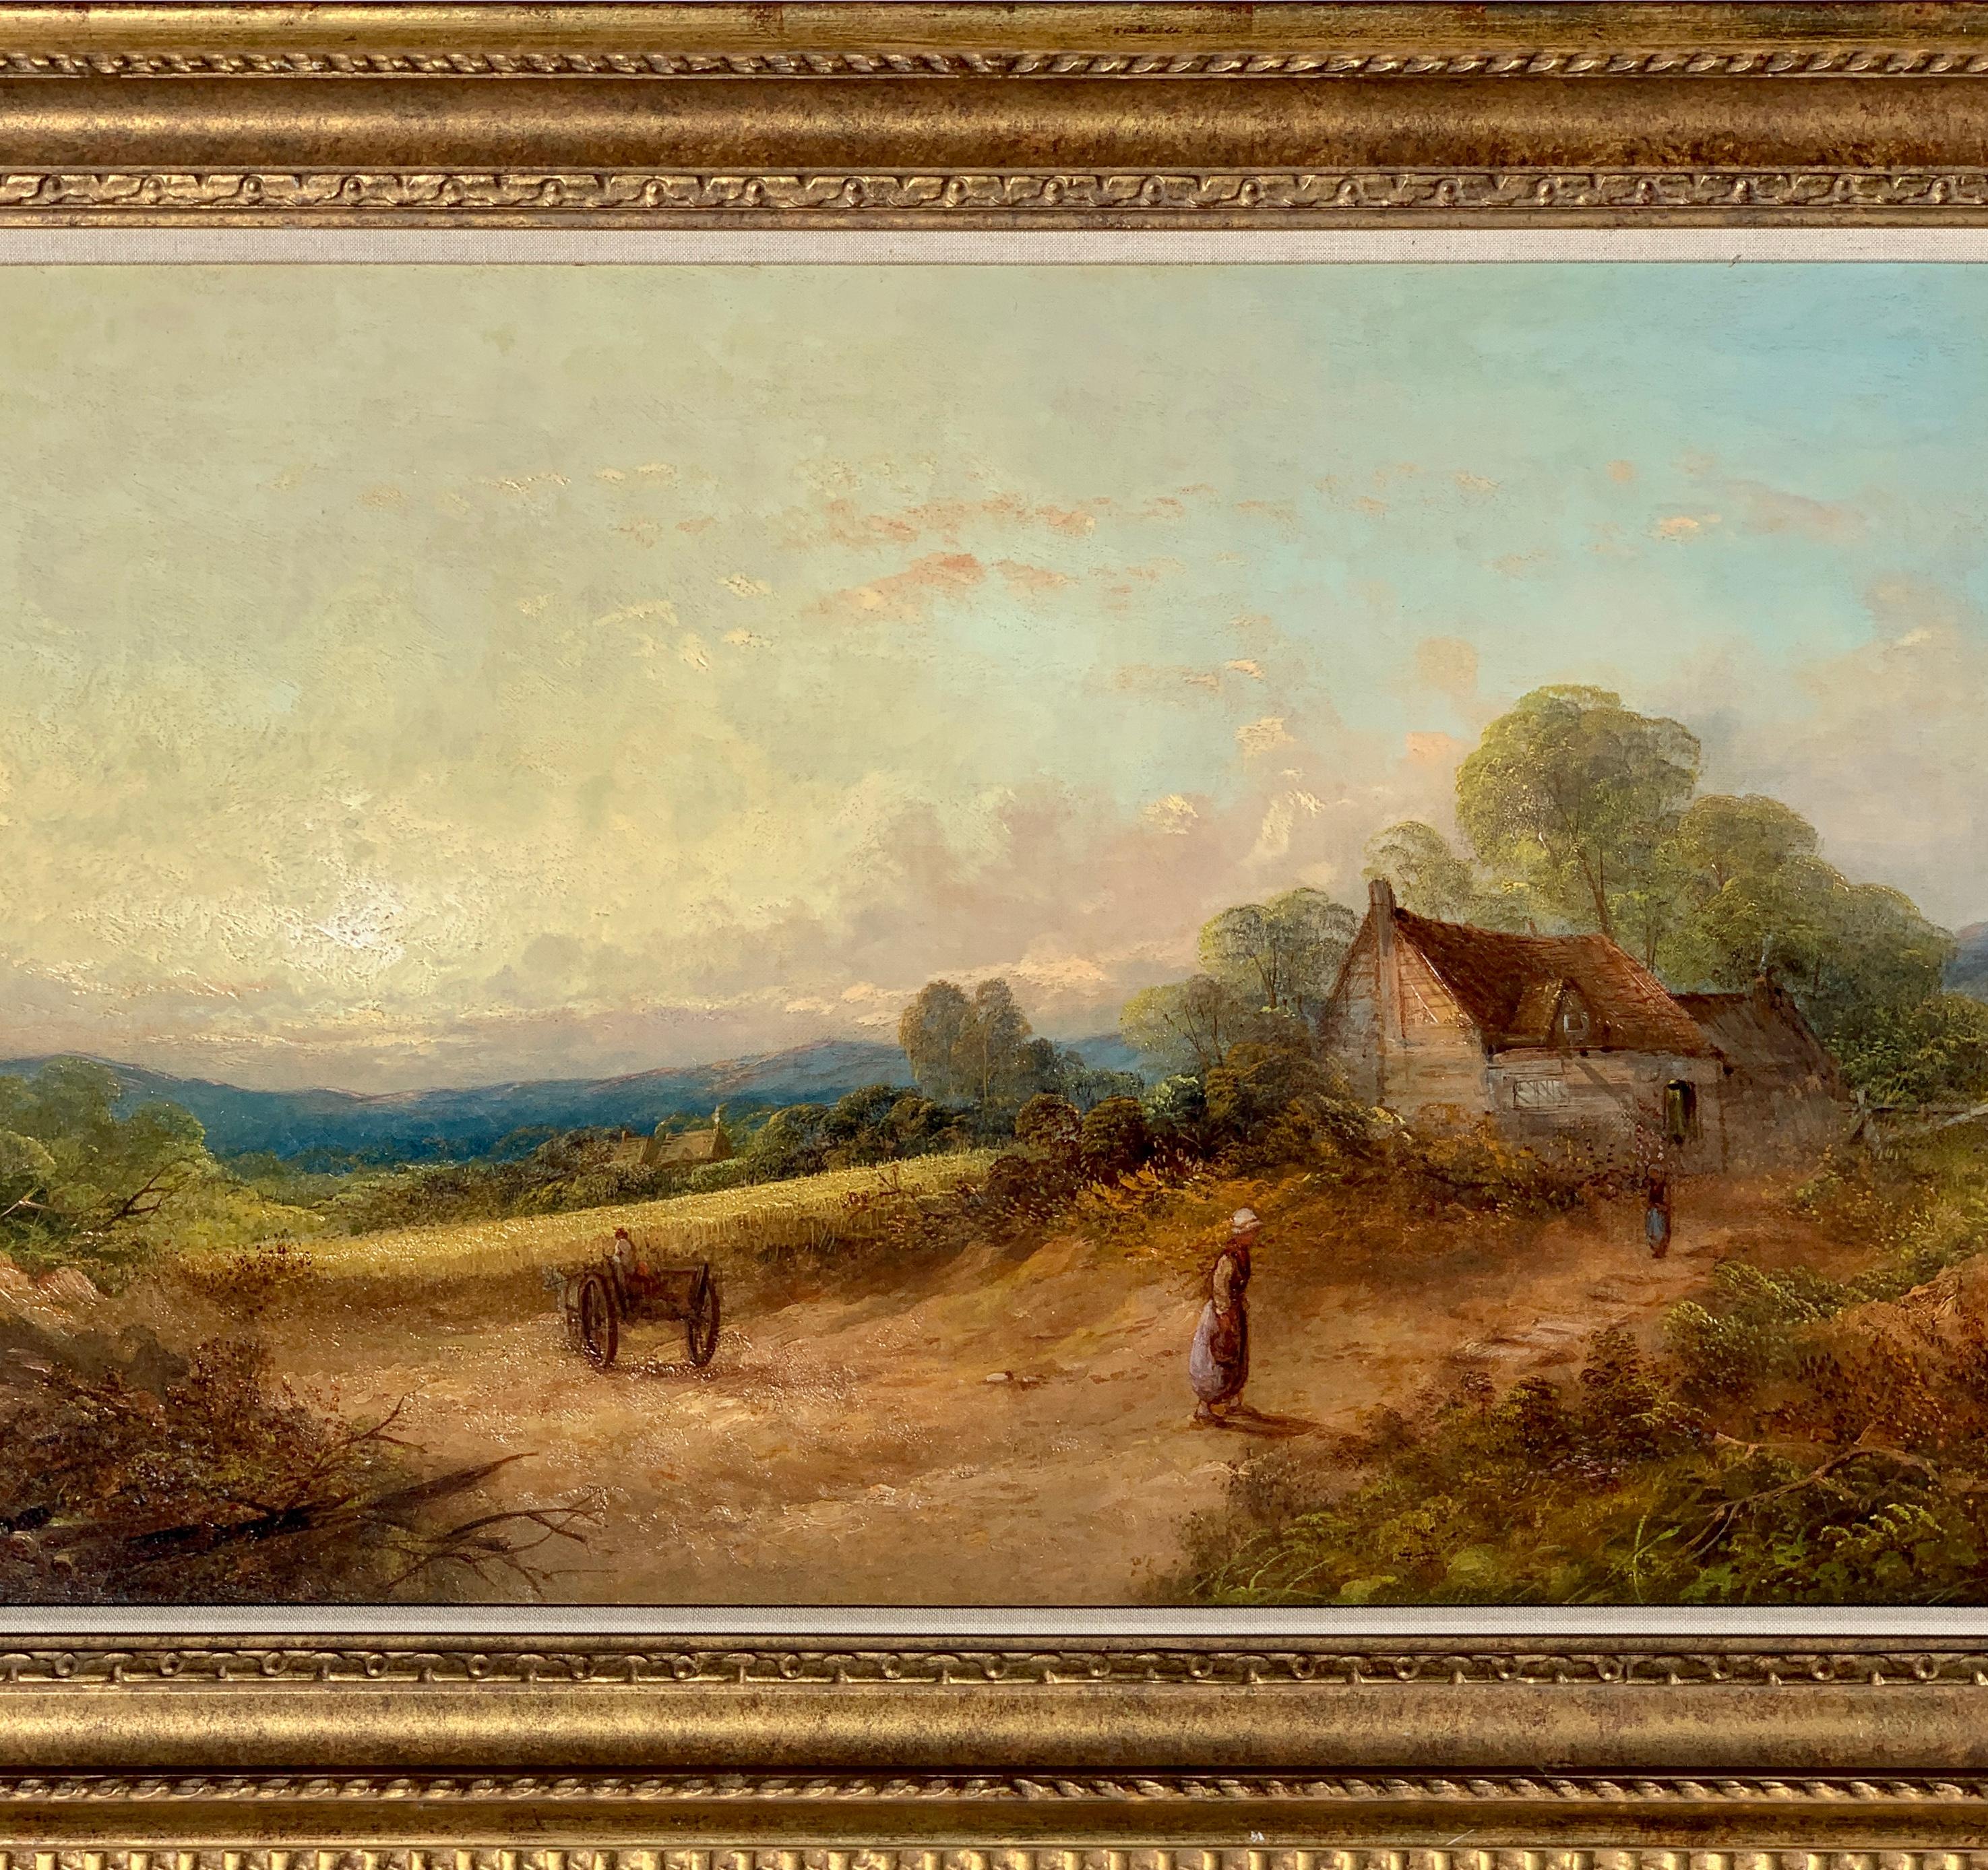 19th century English Victorian landscape with cottage and figure, horse and cart - Painting by R.Stubbs